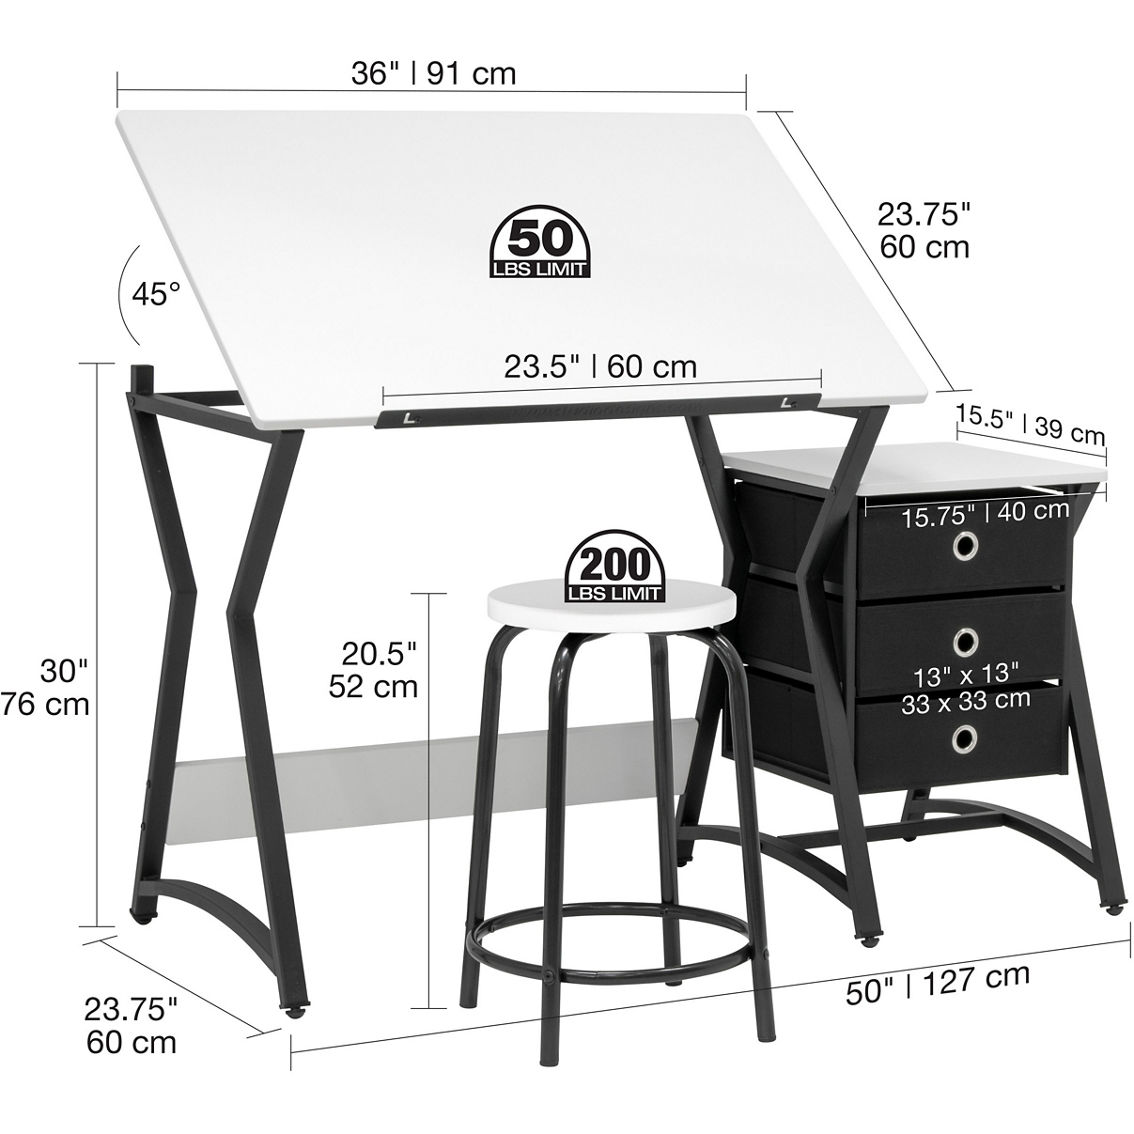 Studio Designs Hourglass Craft Center Angle Adjustable Drafting Table with Drawers - Image 10 of 10